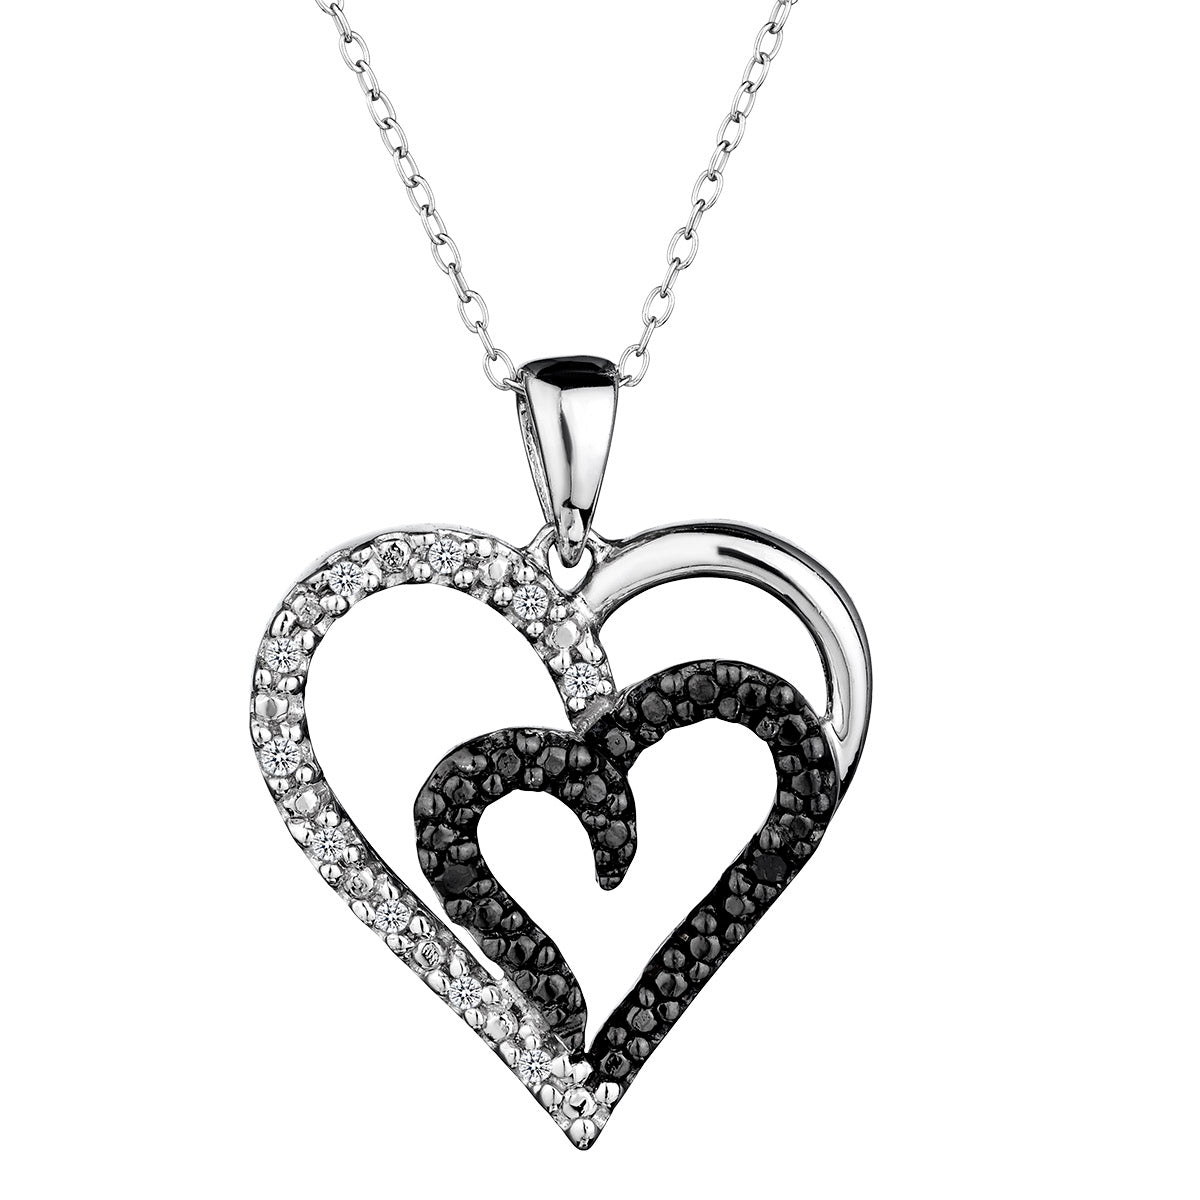 .10 Carat of Black and White Diamonds Double Heart Pendant, Sterling Silver.......................NOW